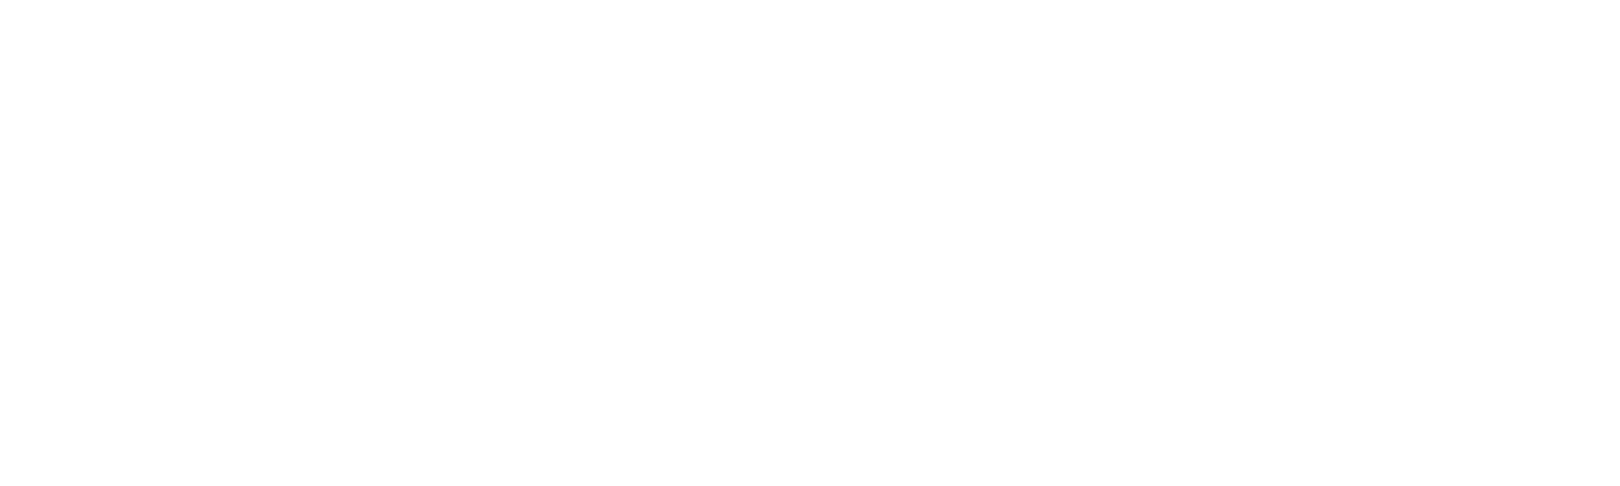 Patty Hamilton for 12th District State Rep